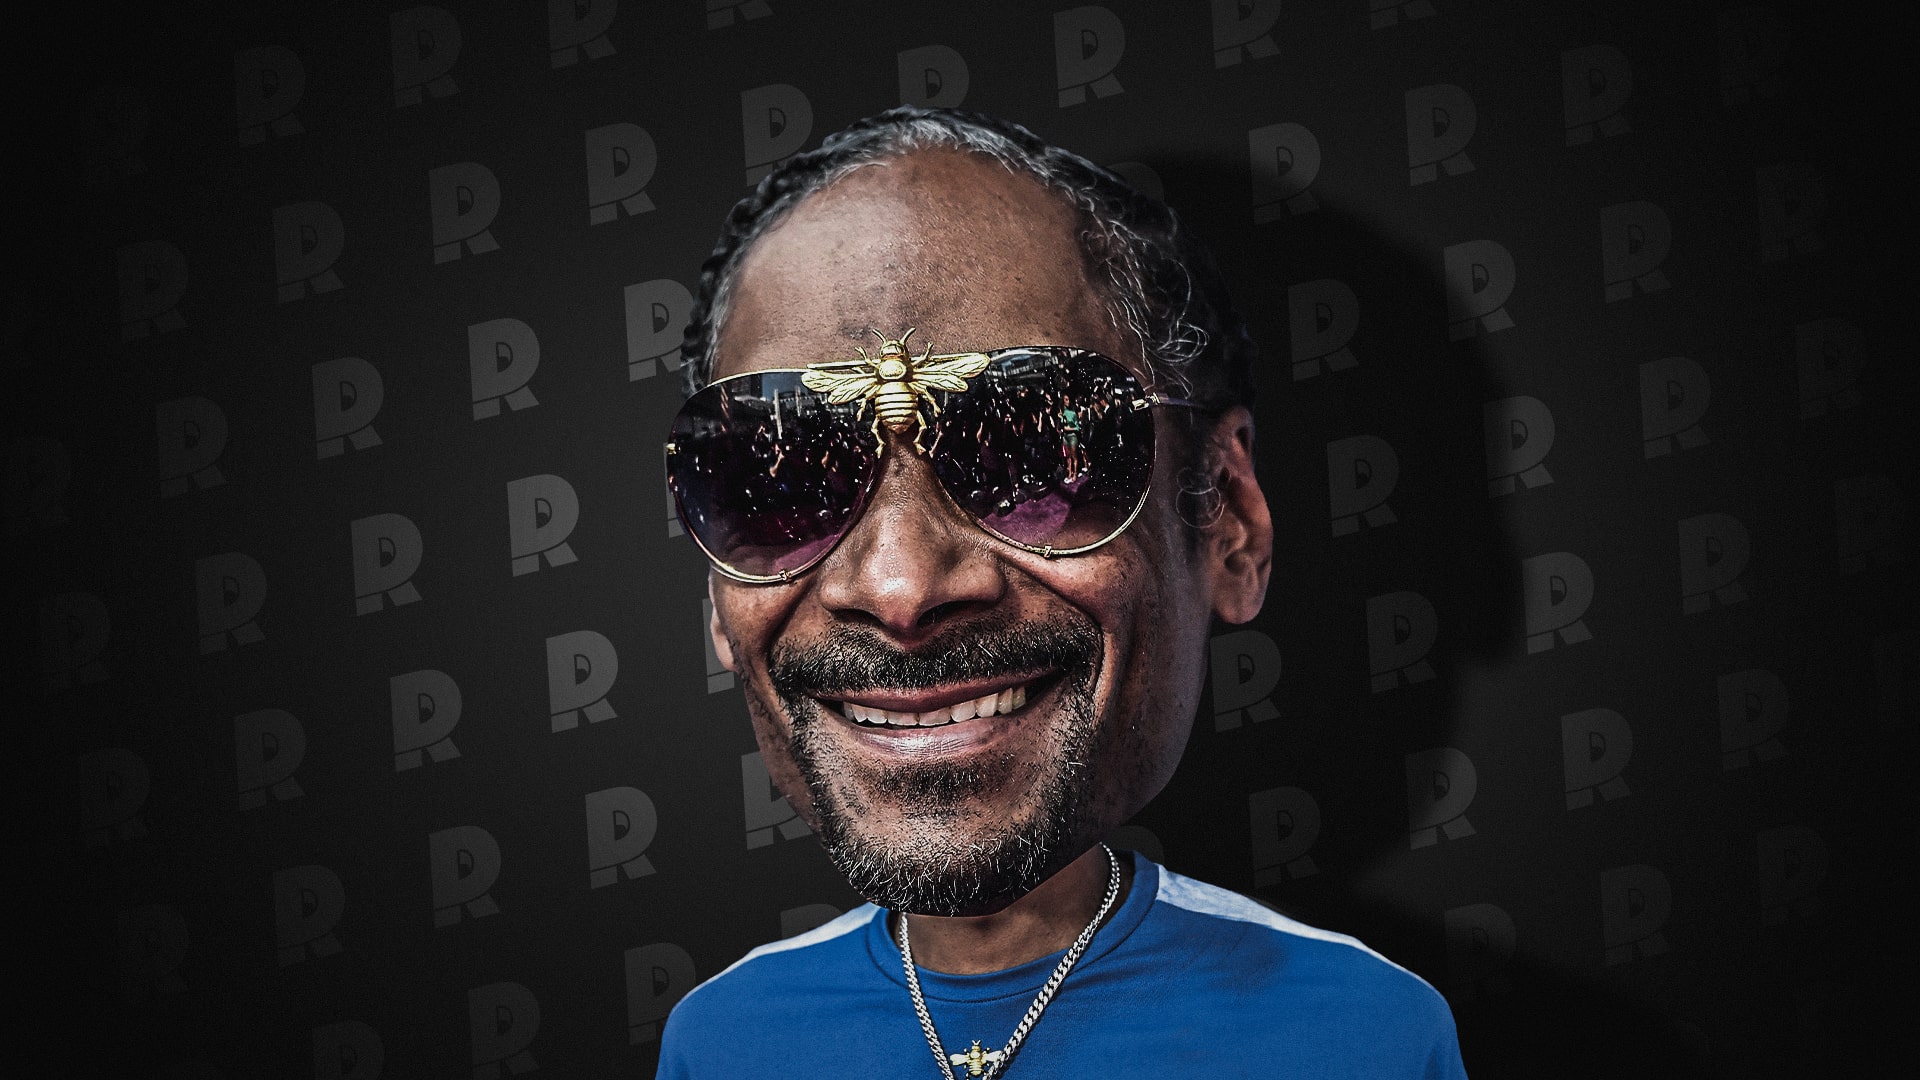 Snoop Dogg Net worth $150 Million - Who Is the Richest Hip Hop Artist in the World of 2022?